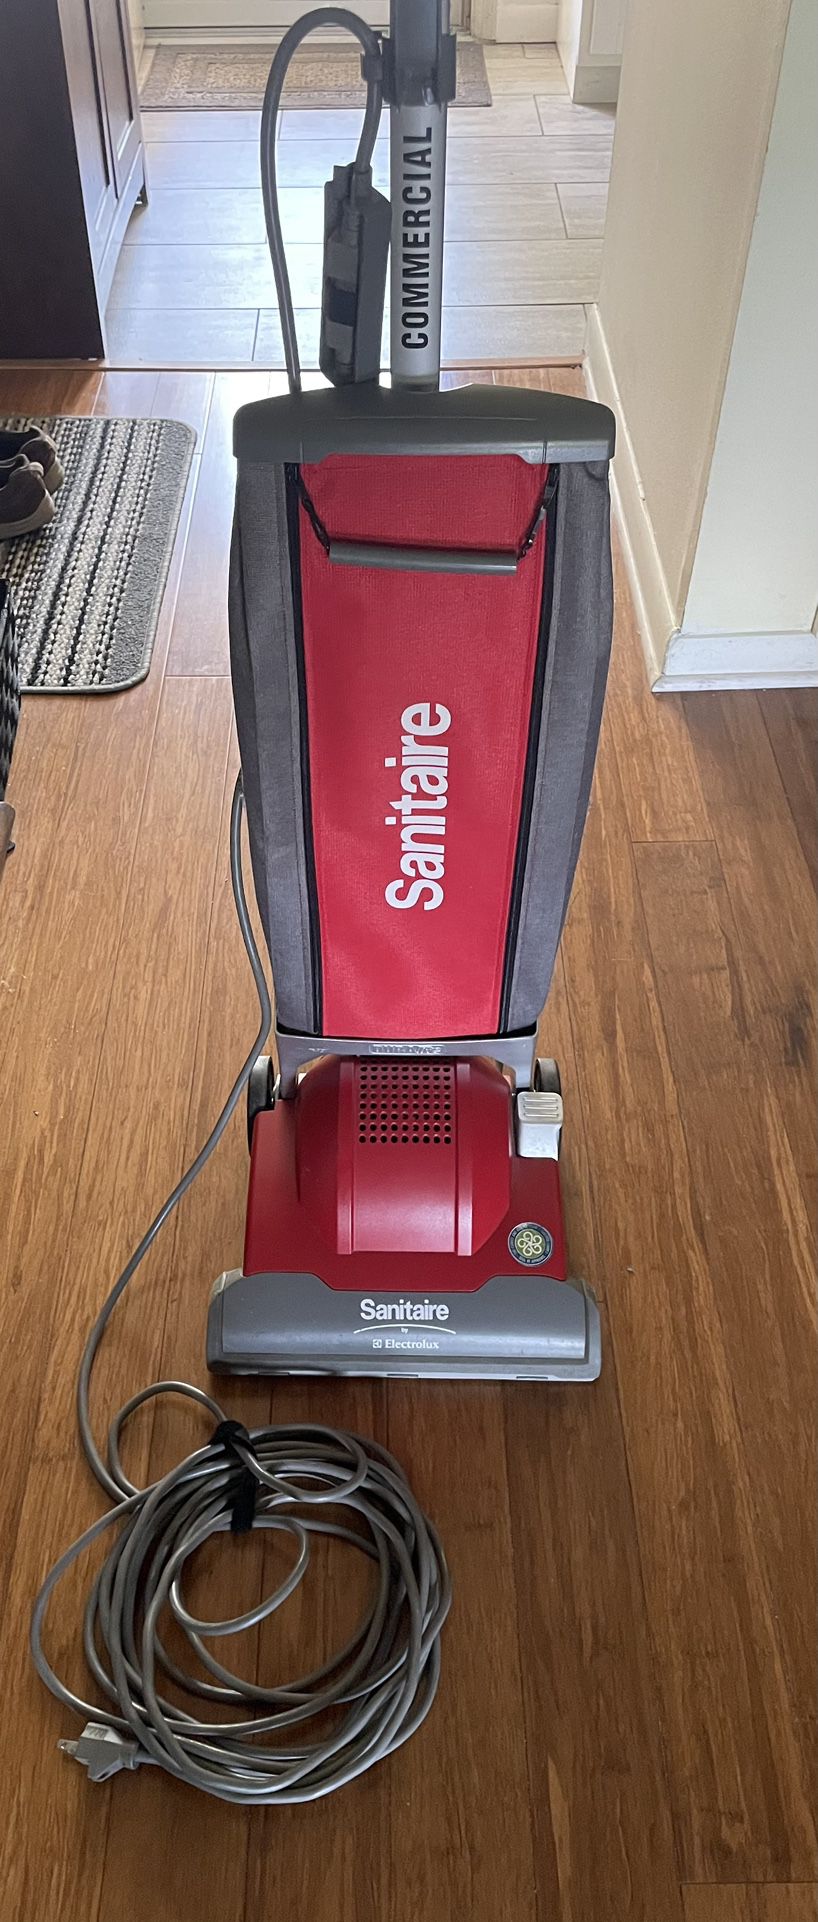 SANITAIRE BY ELECTROLUX SC 9050 UPRIGHT VACUUM CLEANER.